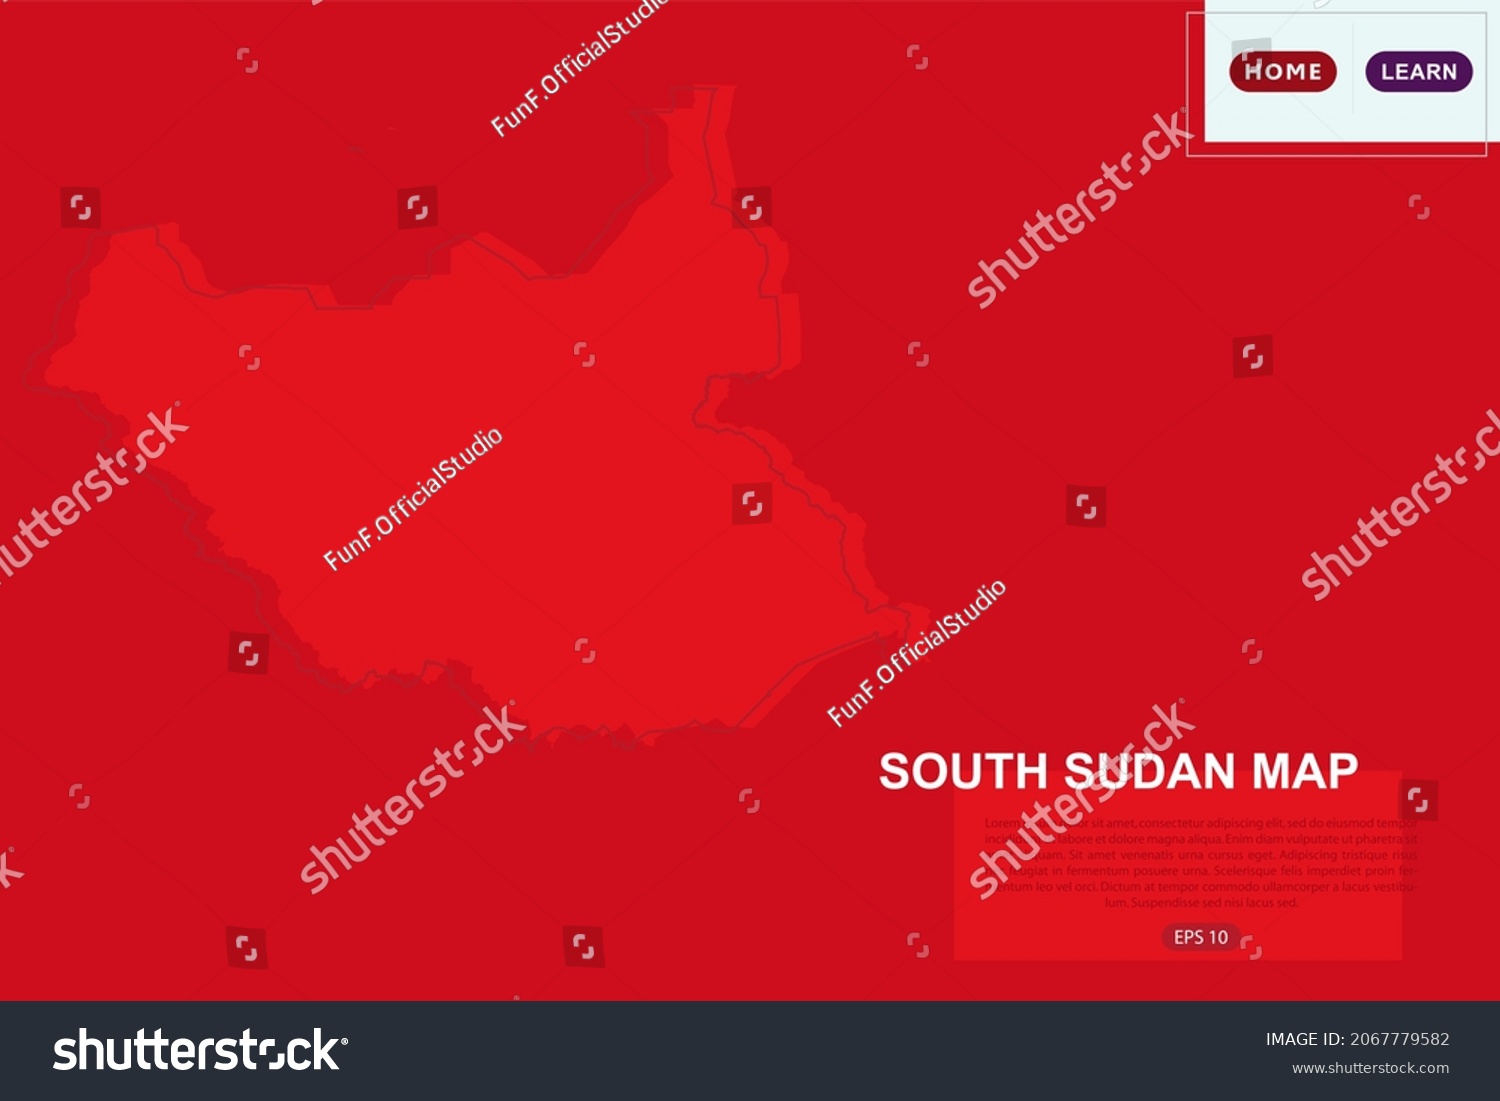 South Sudan Map - World Map International vector template with red color and outline sketch isolated on red background for education, design, website, banner - Vector illustration eps 10 #2067779582